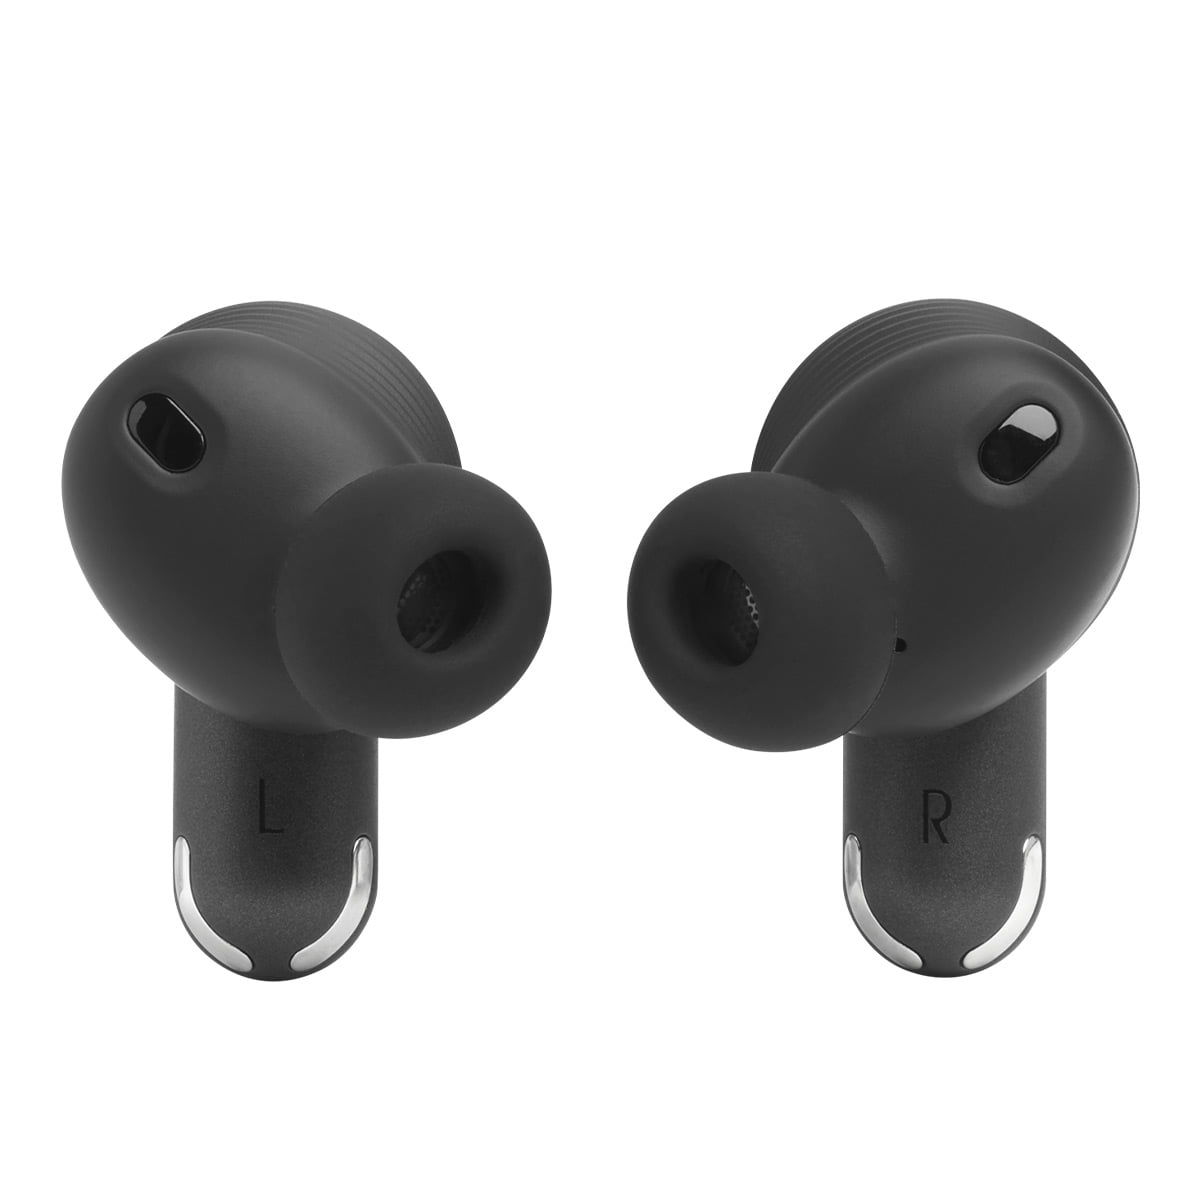 2 Case Earbuds Smart Cancelling JBL Wireless Pro (Black) with True Noise Tour